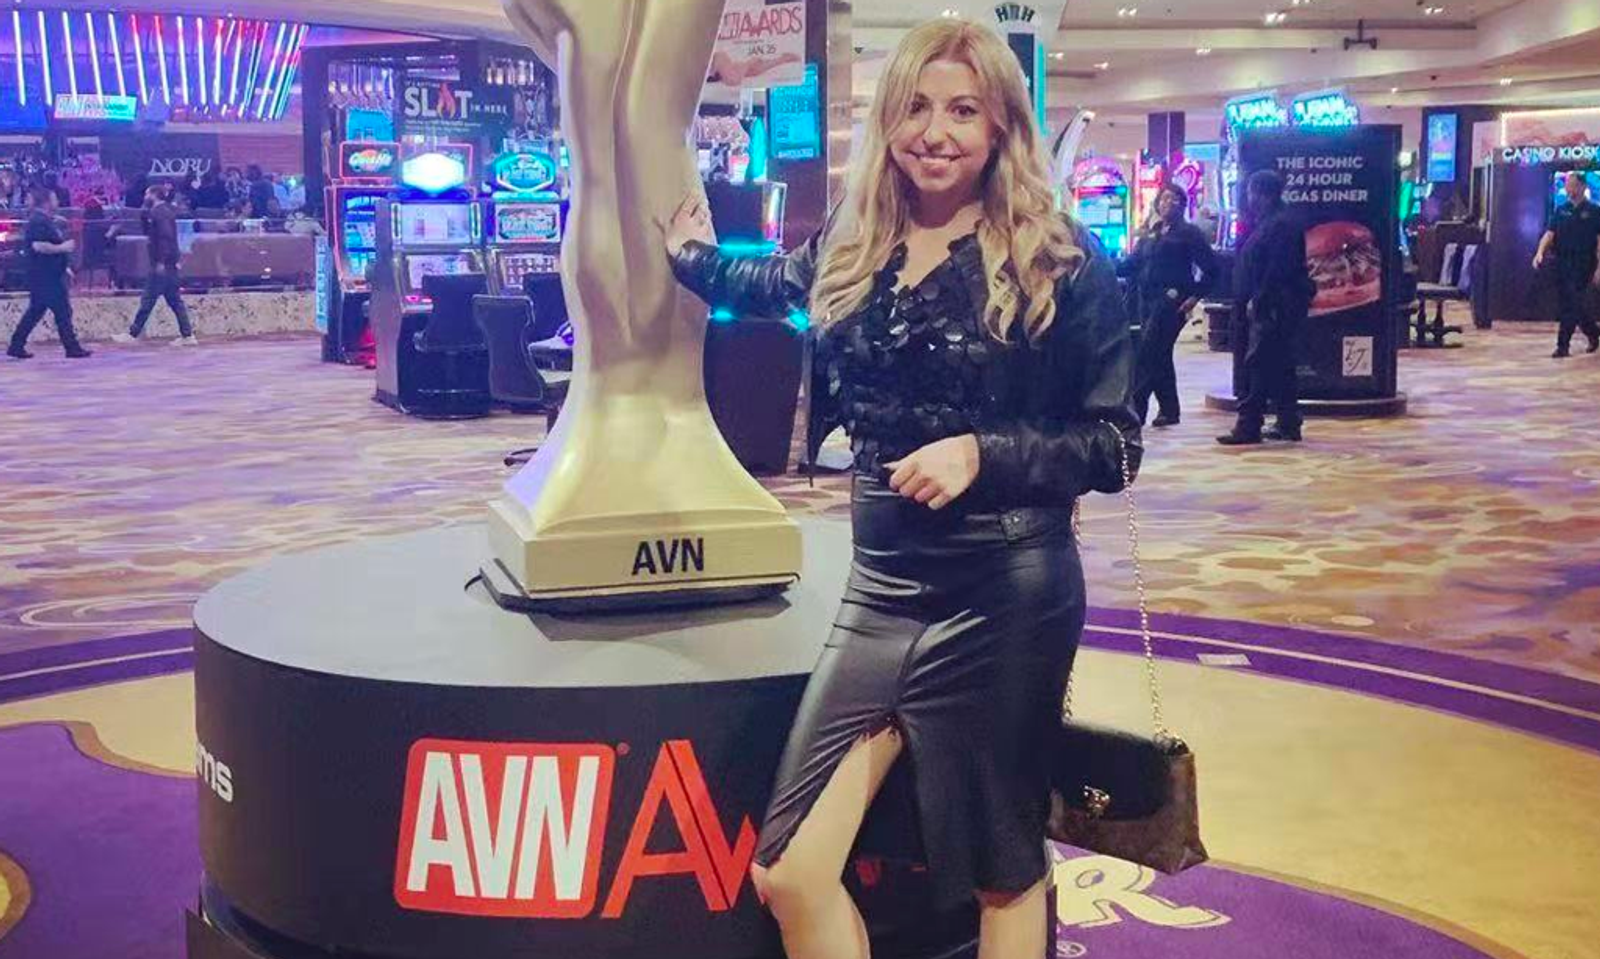 Svakom Promoted New Products, Made Connections at AVN Expo